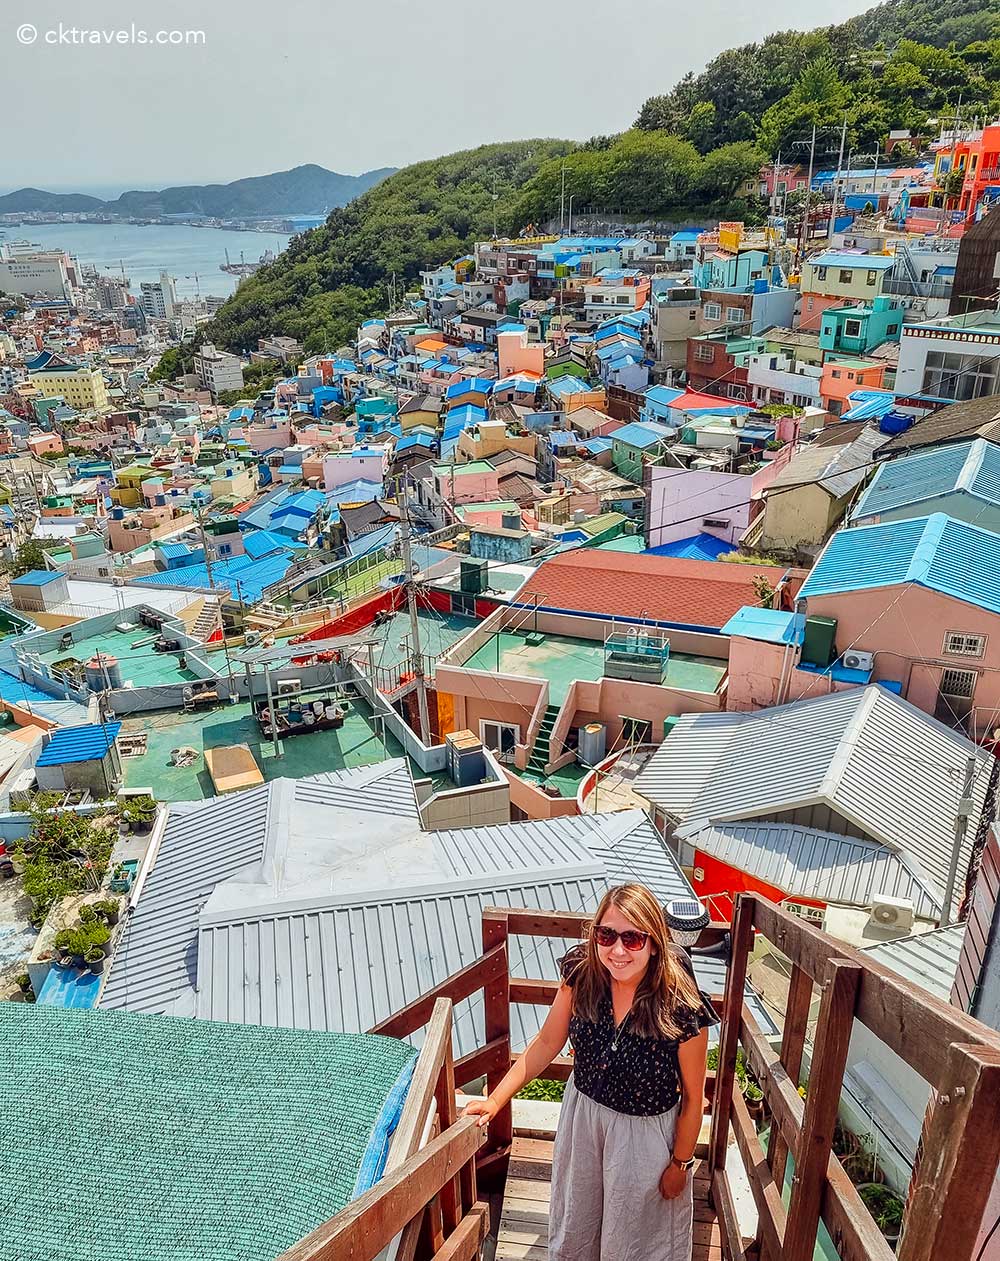 Gamcheon Culture Village - Things to do in Busan